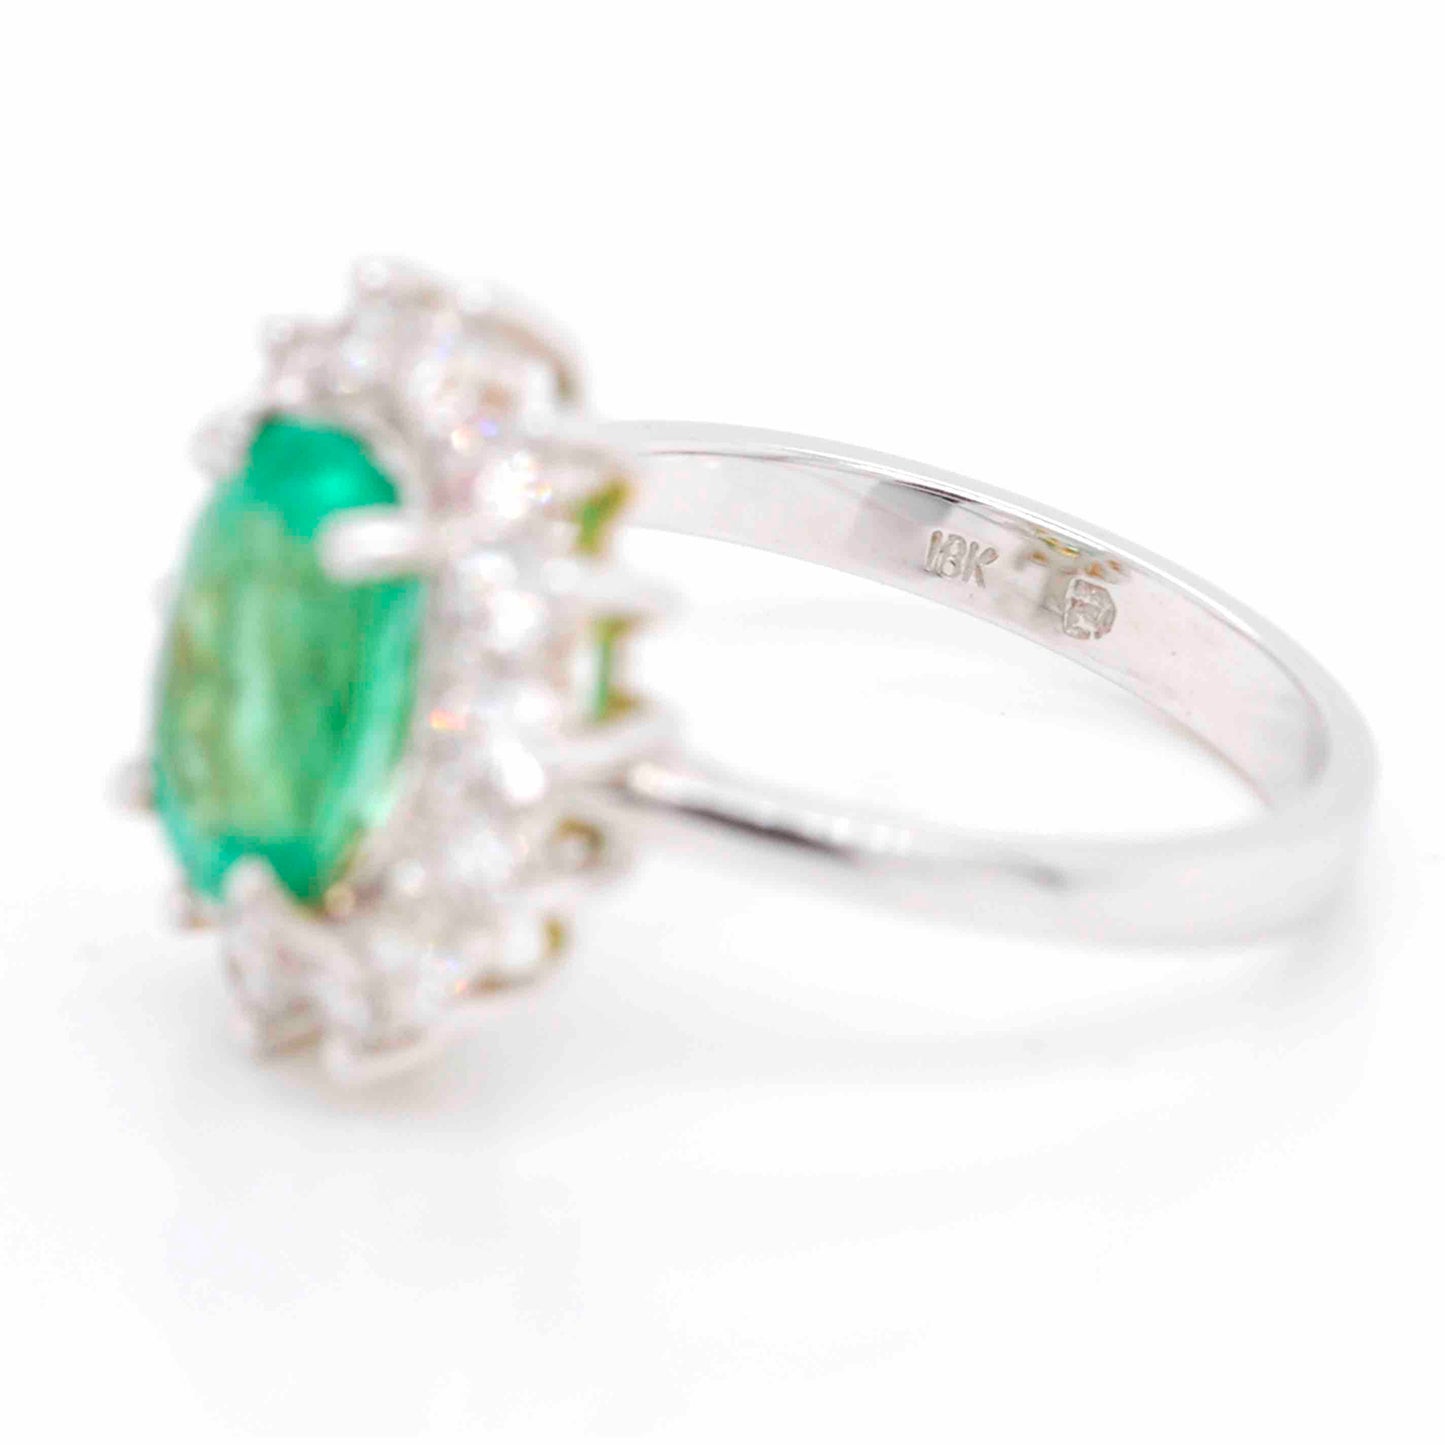 Columbian Emerald Diamond Ring with a stunning oval emerald and diamond accents